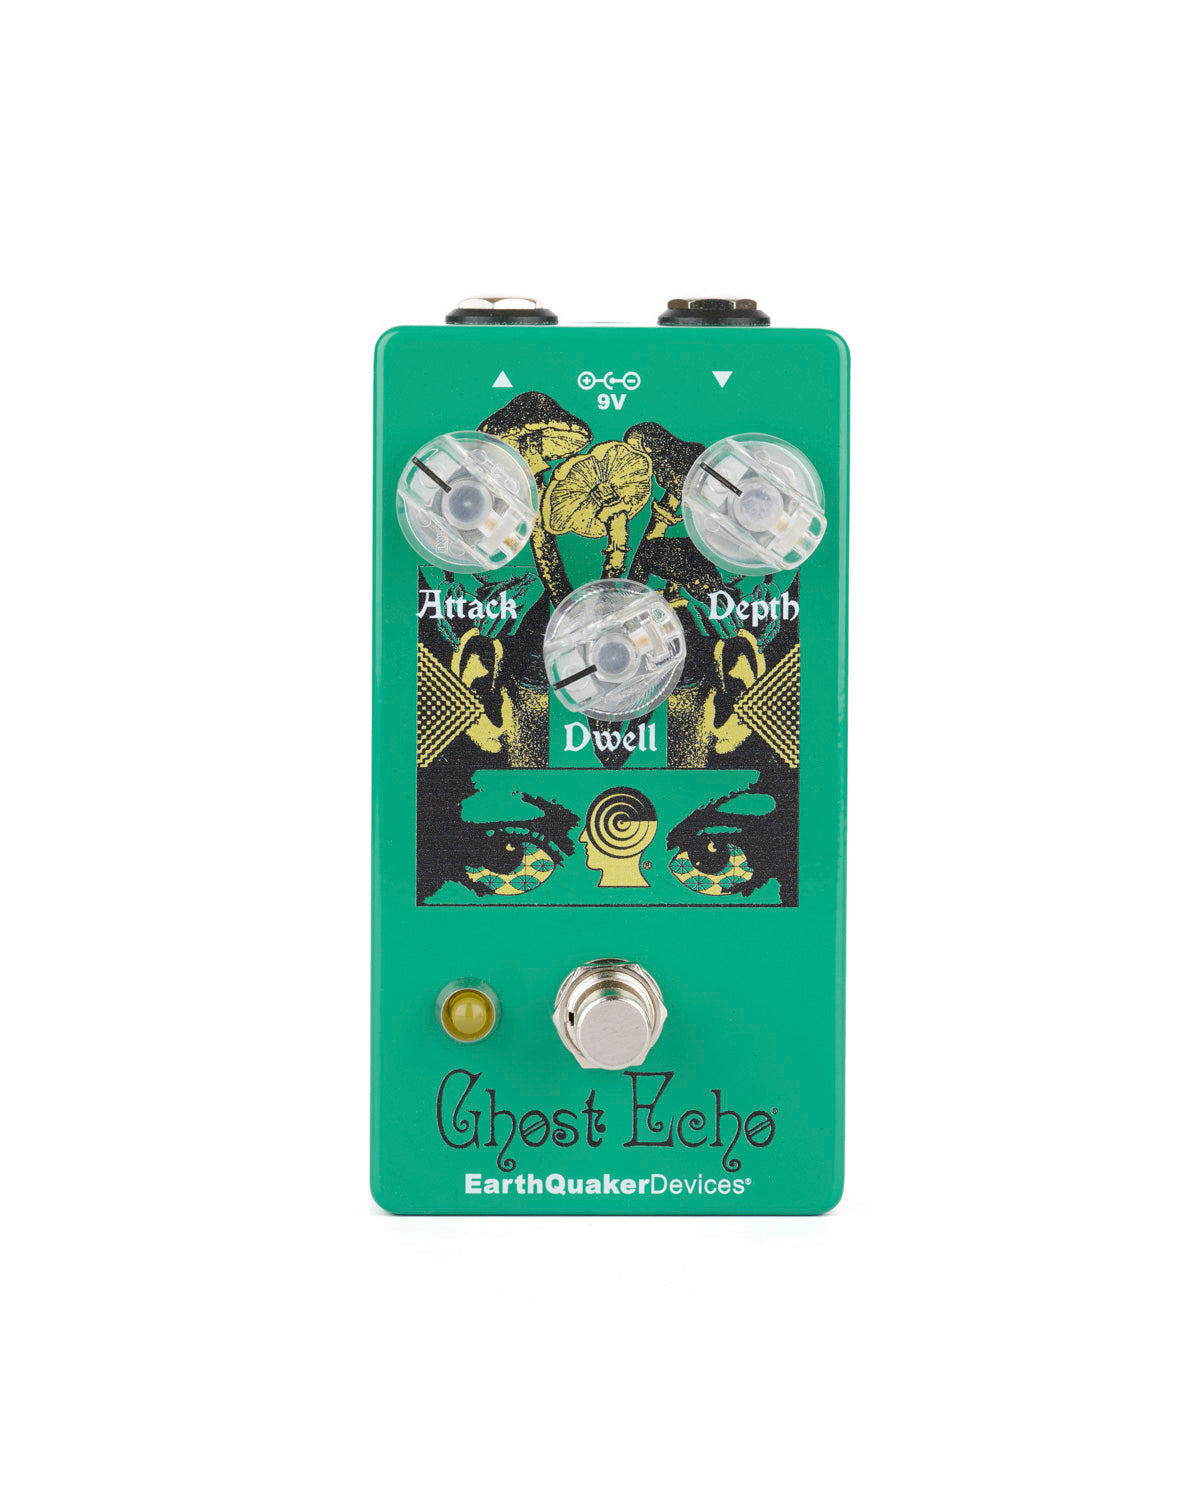 EarthQuaker devices